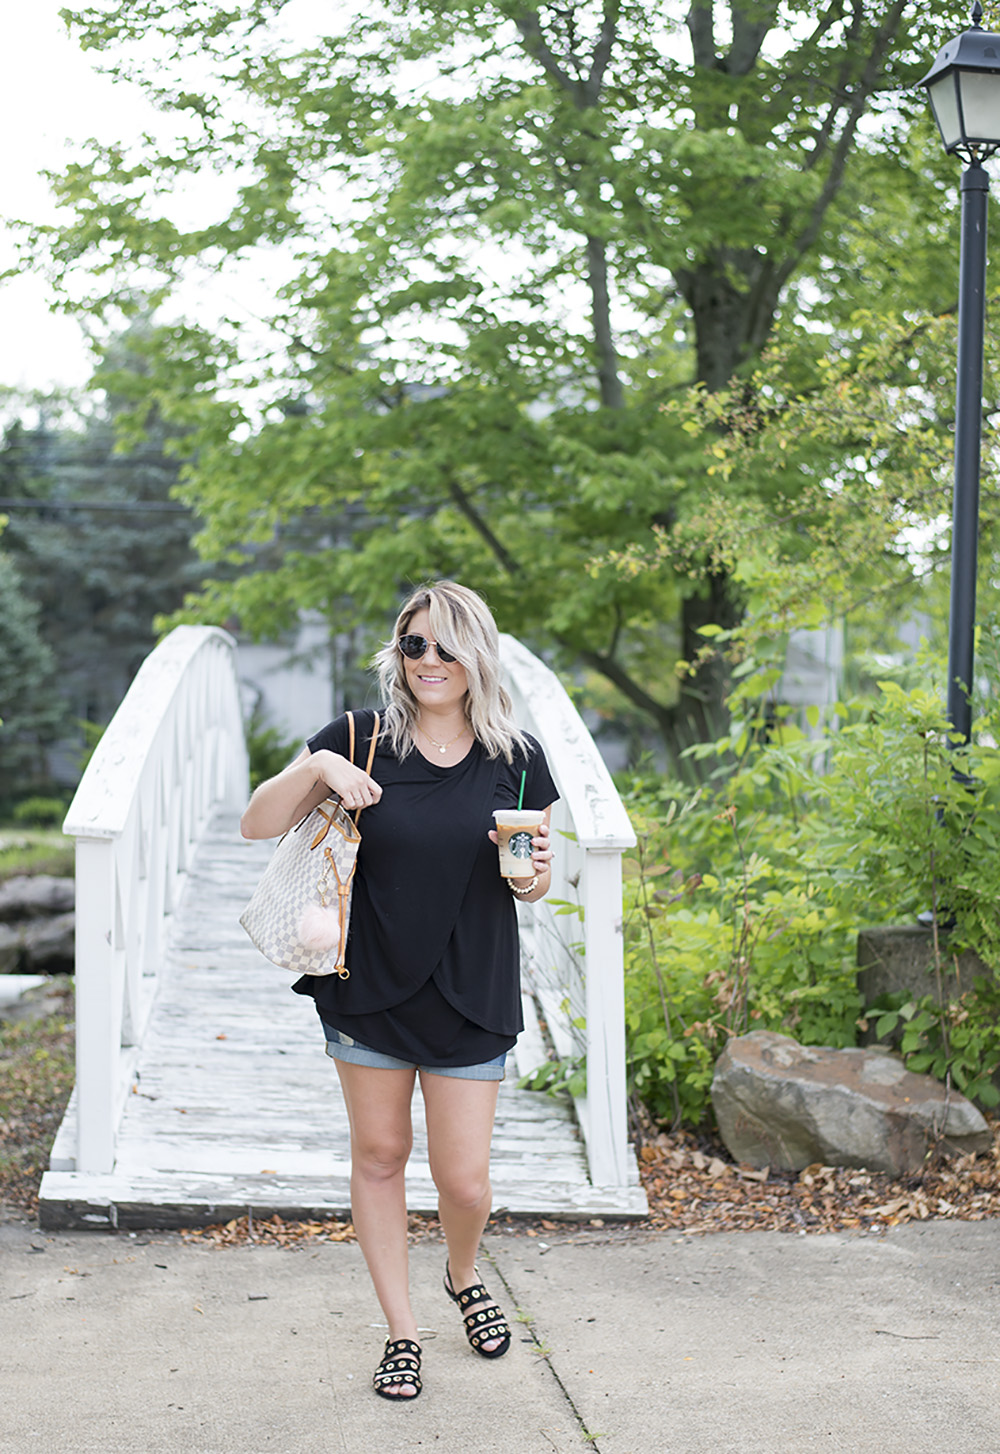 Cleveland blogger The Samantha Show shares tips for dressing your postpartum body. 